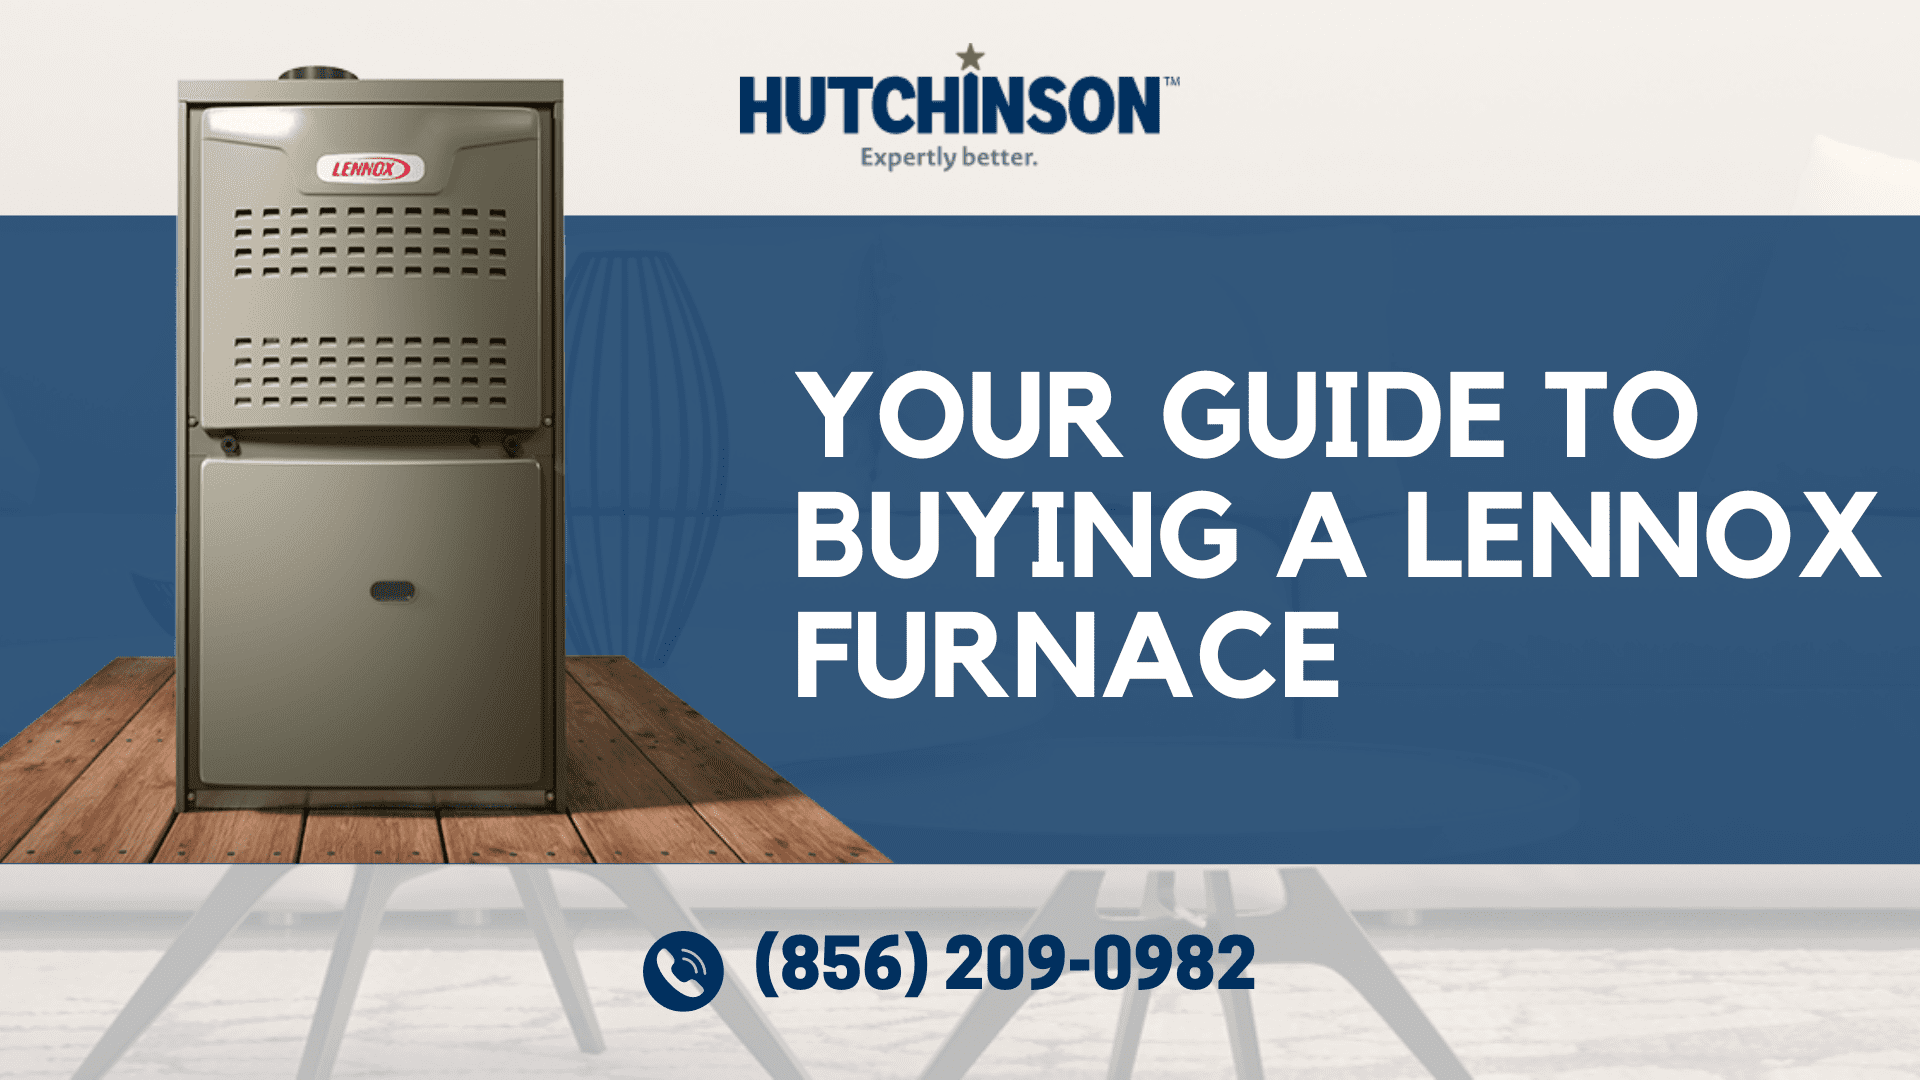 7 Reasons Why You Should Get Your Furnace Inspected Before Winter